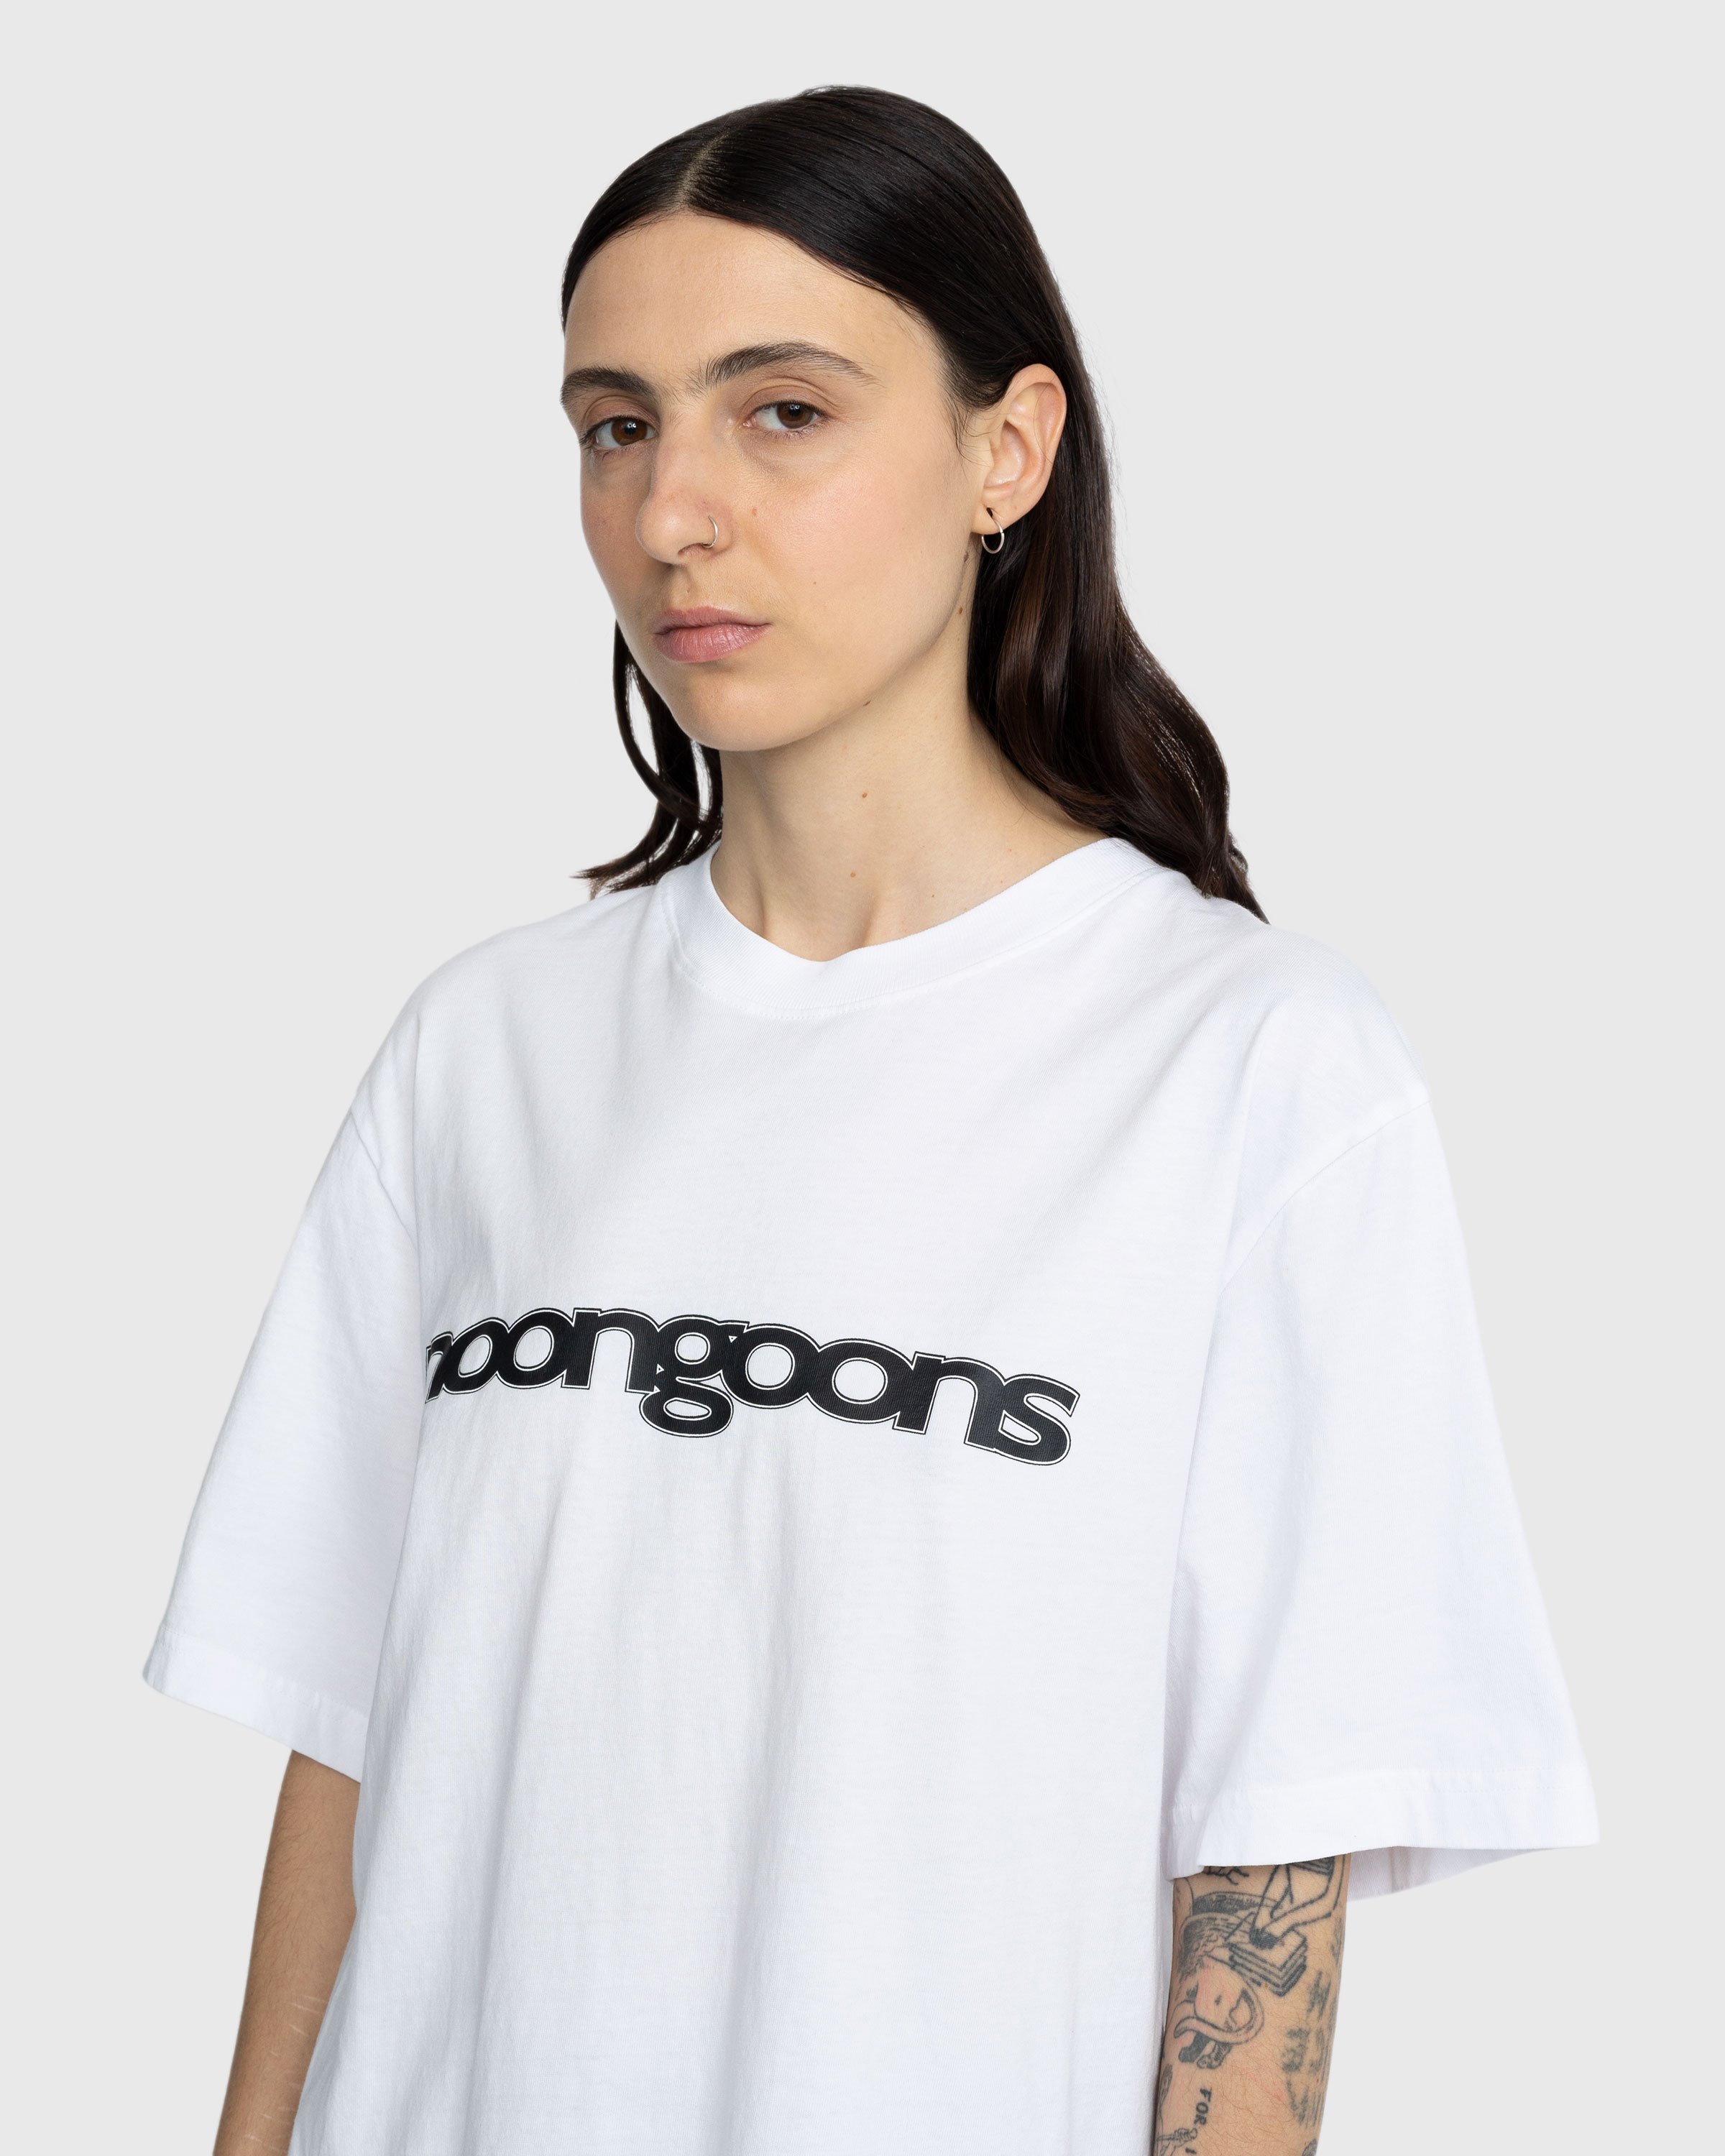 Noon Goons - Very Simple T-Shirt White - Clothing - White - Image 6